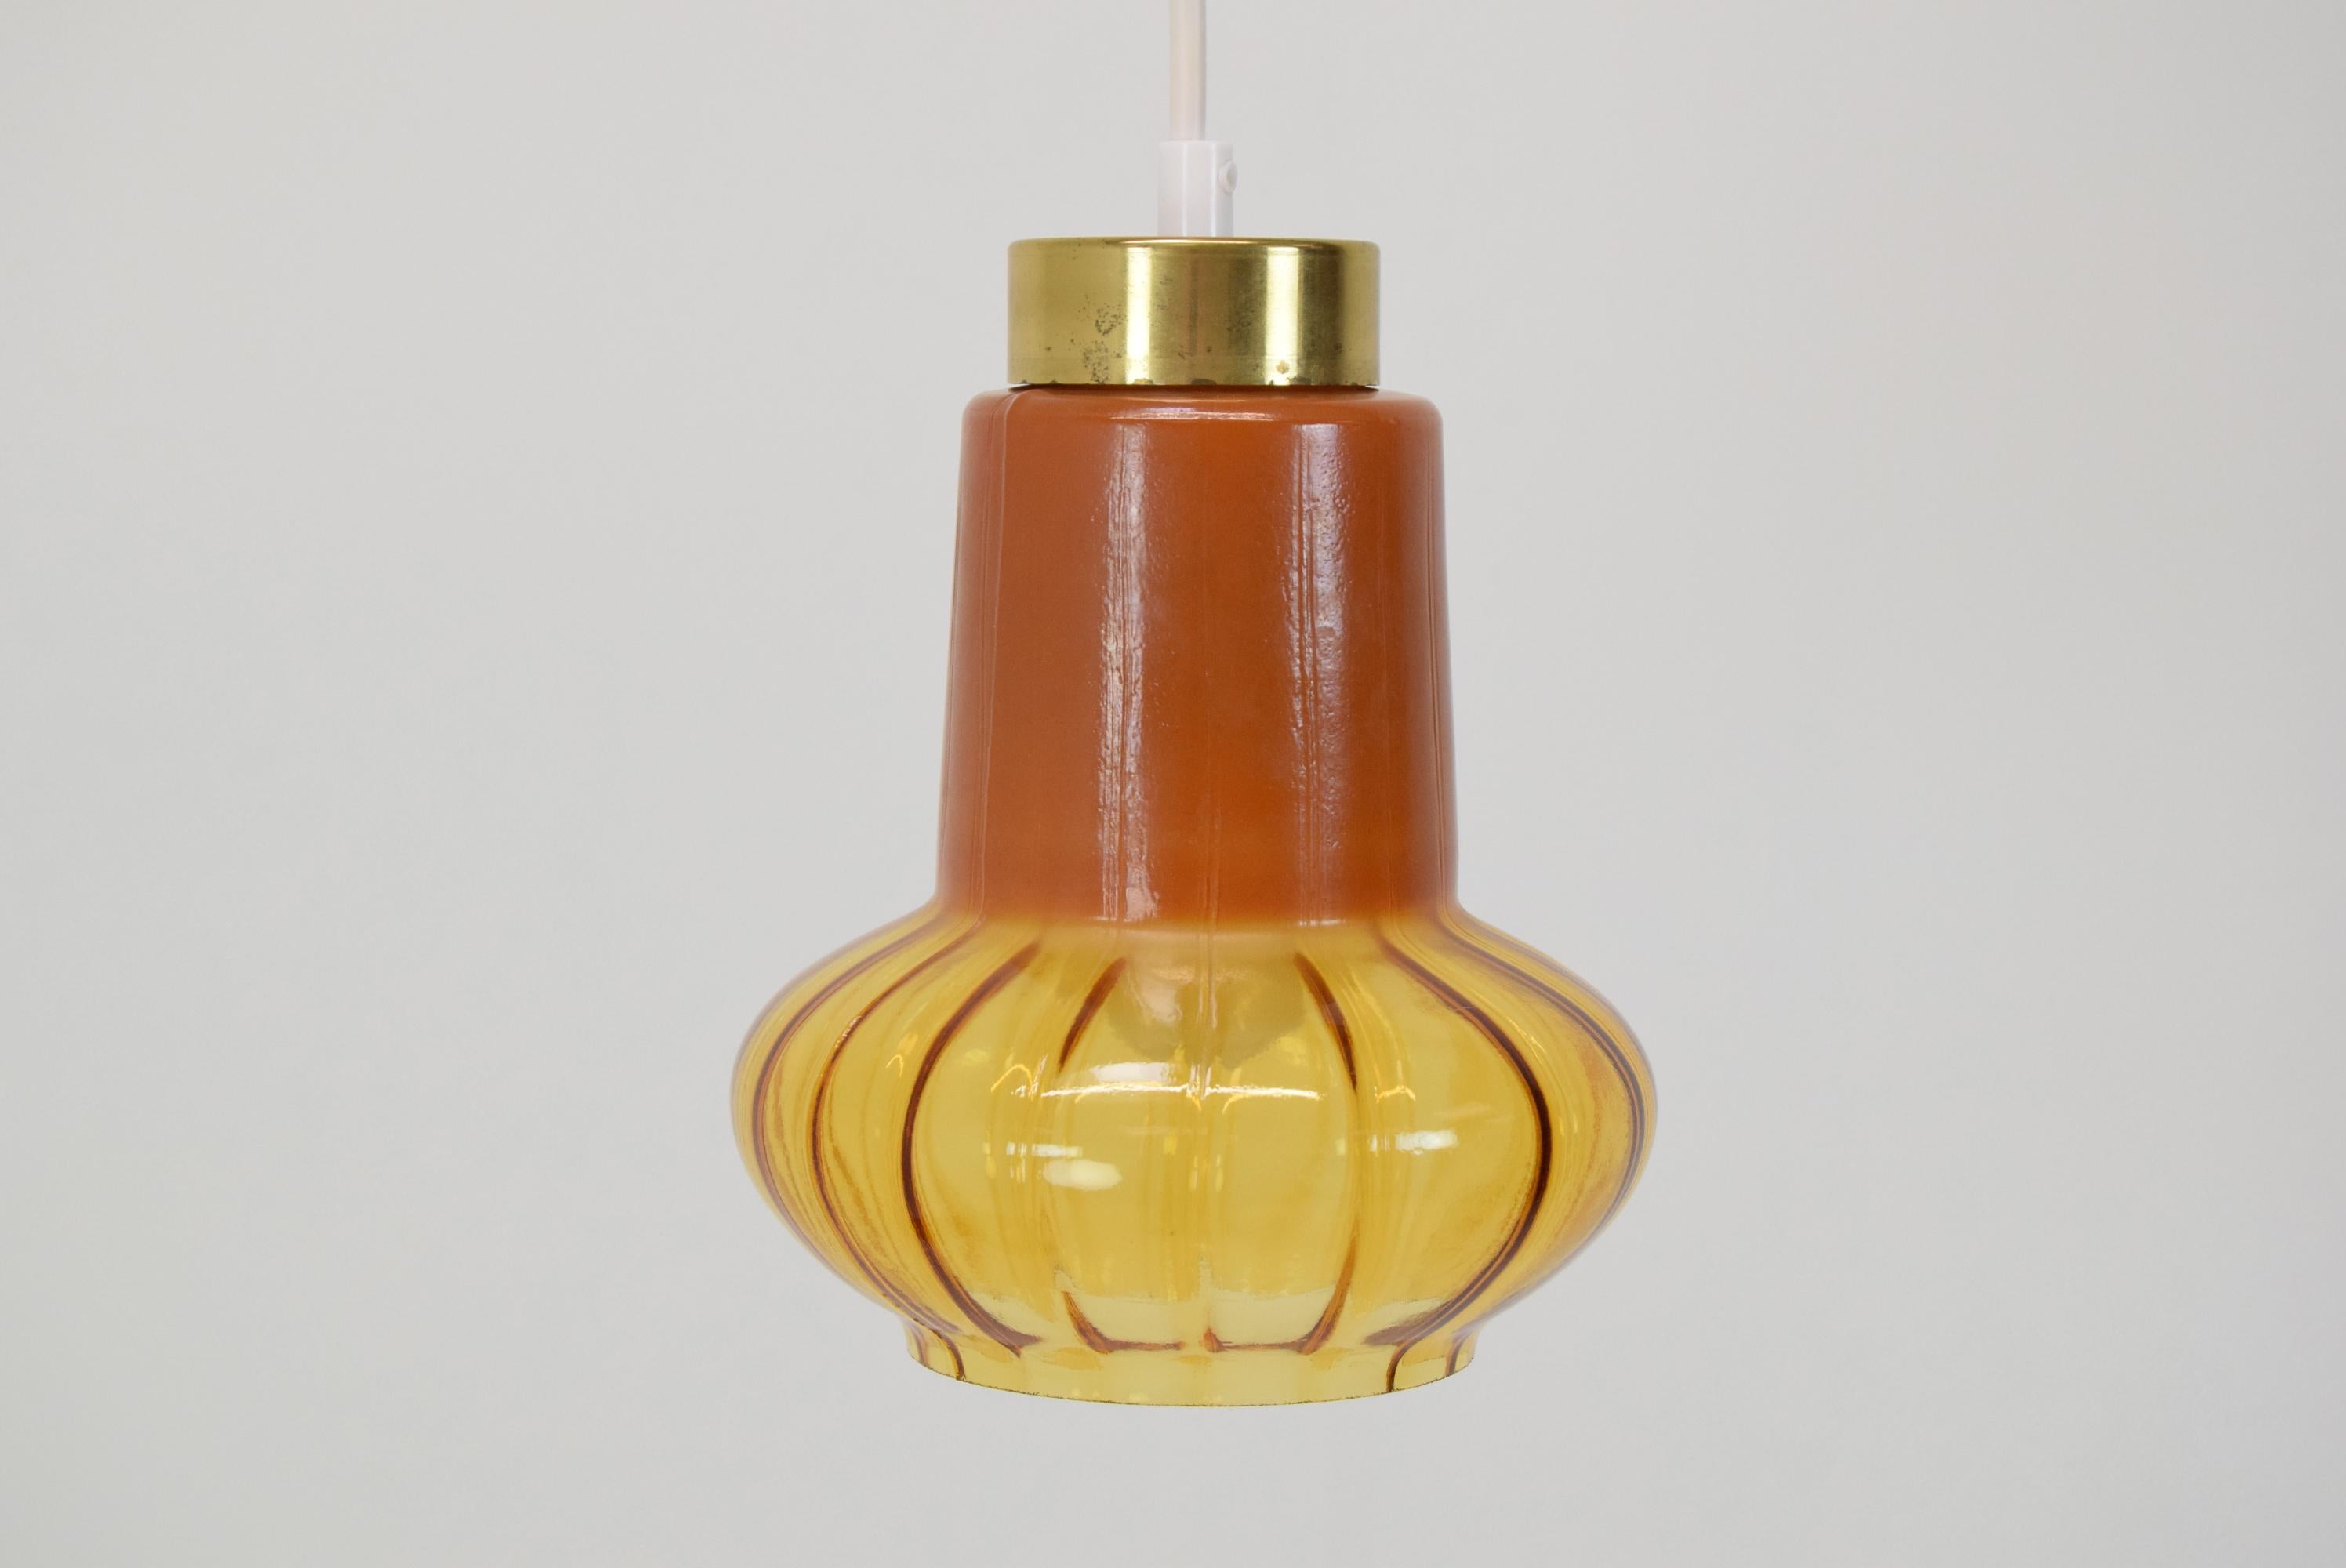 Made in Czechoslovakia
Made of Glass,Brass,Plastic
With aged patina
New cabling
1x E27 or E26 bulb
Height can be adjusted
Five pieces in stock
Good original condition
US wiring compatible.